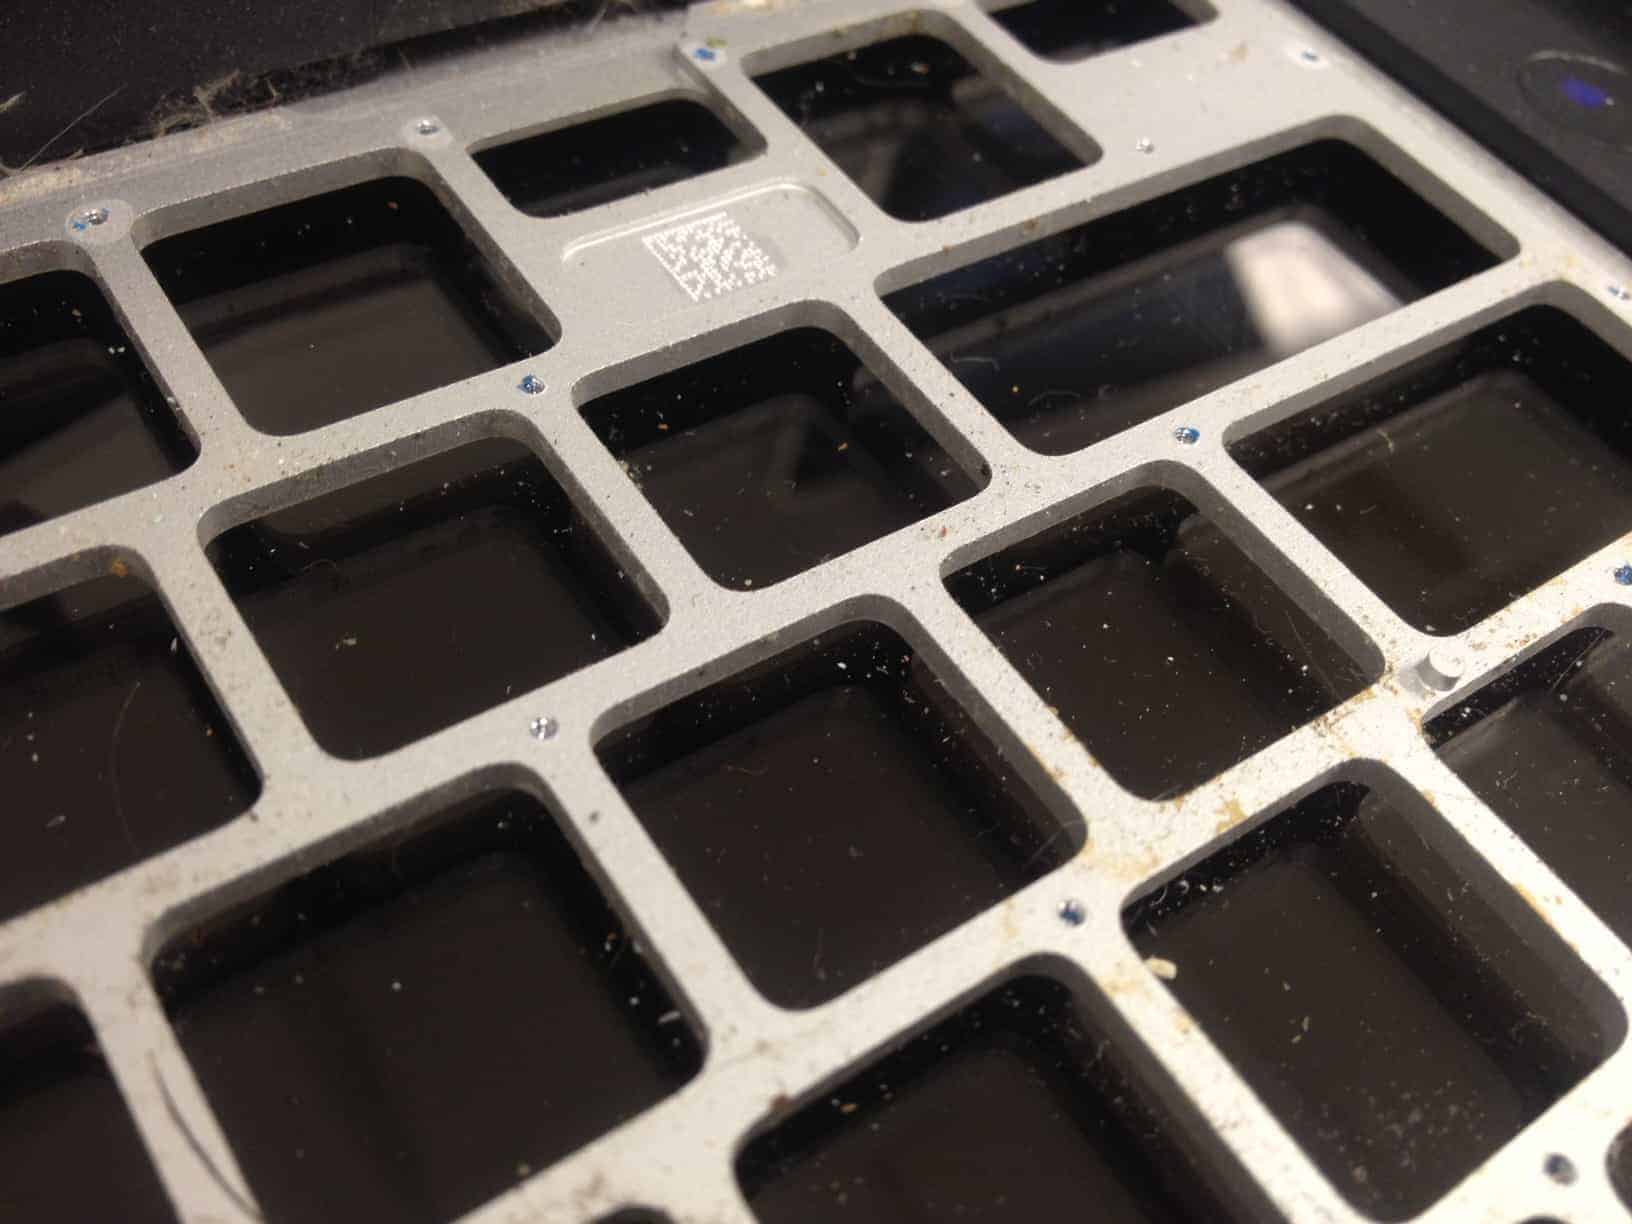 Liquid Damaged Keyboard Removed from Mac